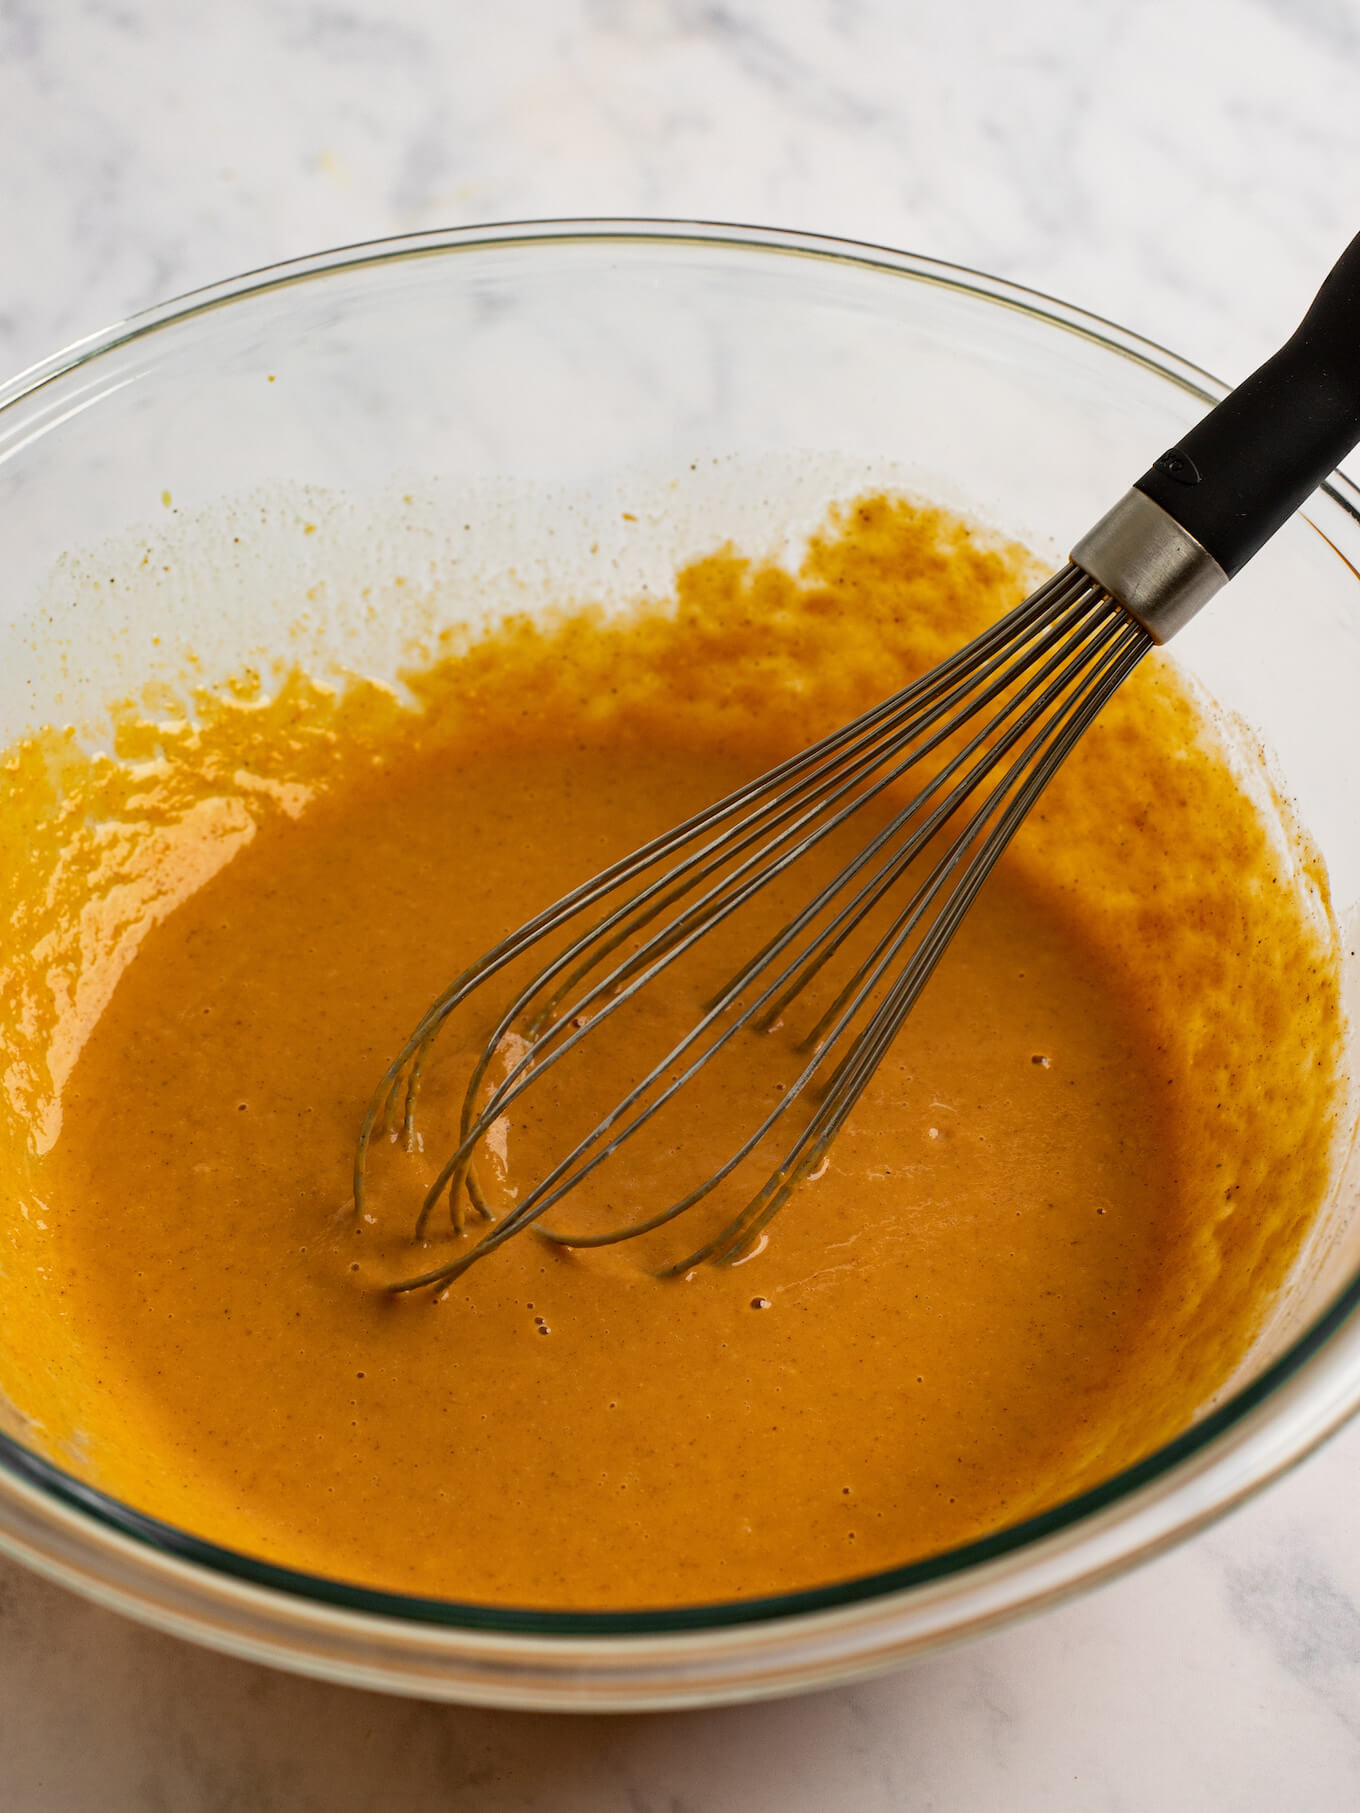 The filling ingredients whisked together in a glass mixing bowl. A whisk rests on the side of the bowl.